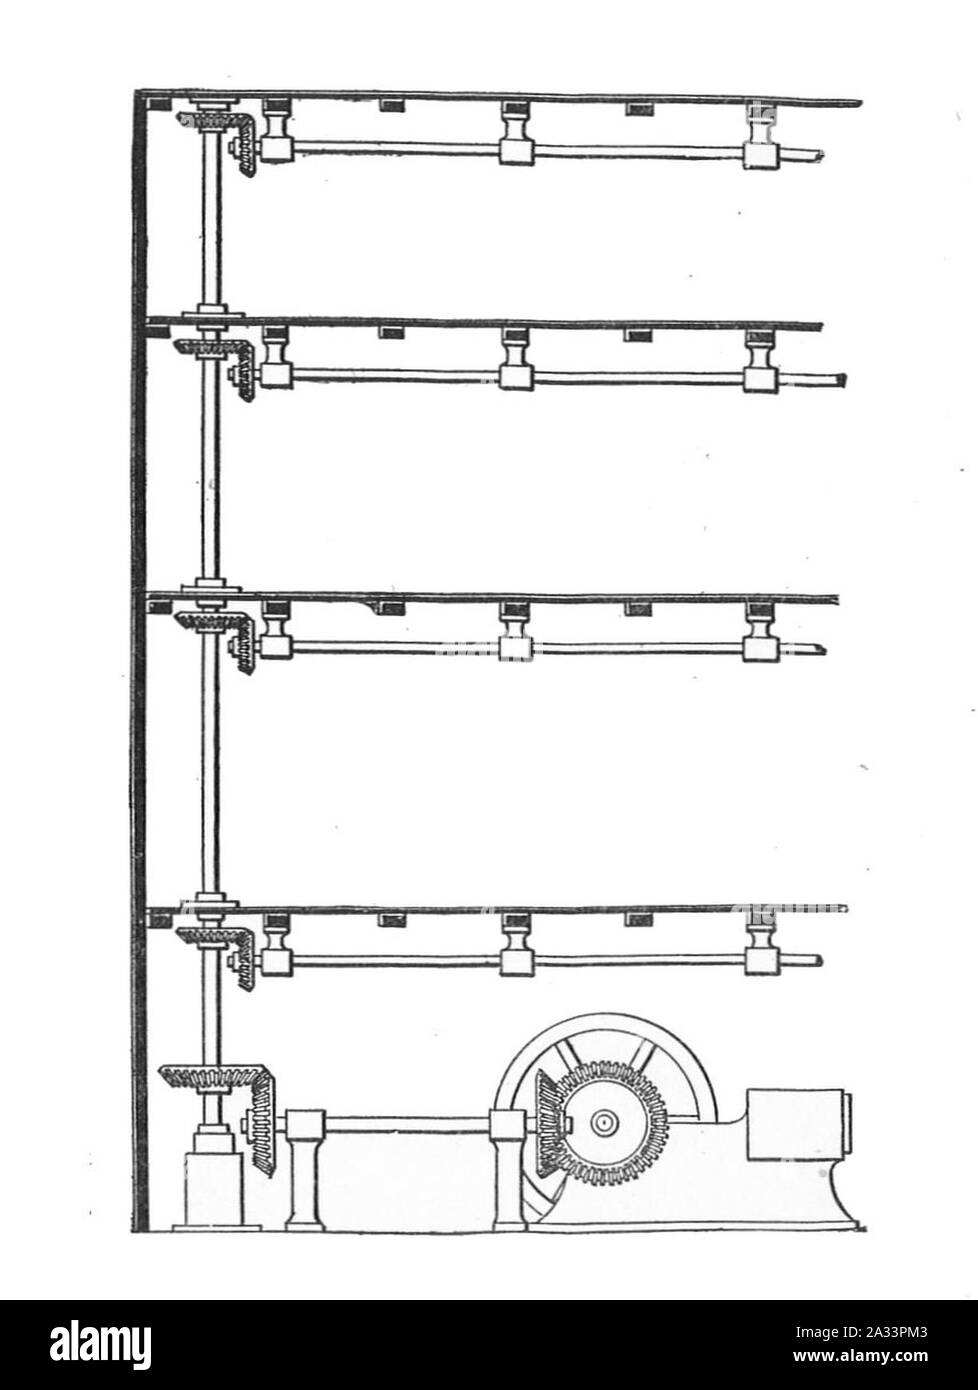 Factory power distribution by bevel-geared lineshafts (Rankin Kennedy, Modern Engines, Vol VI). Stock Photo